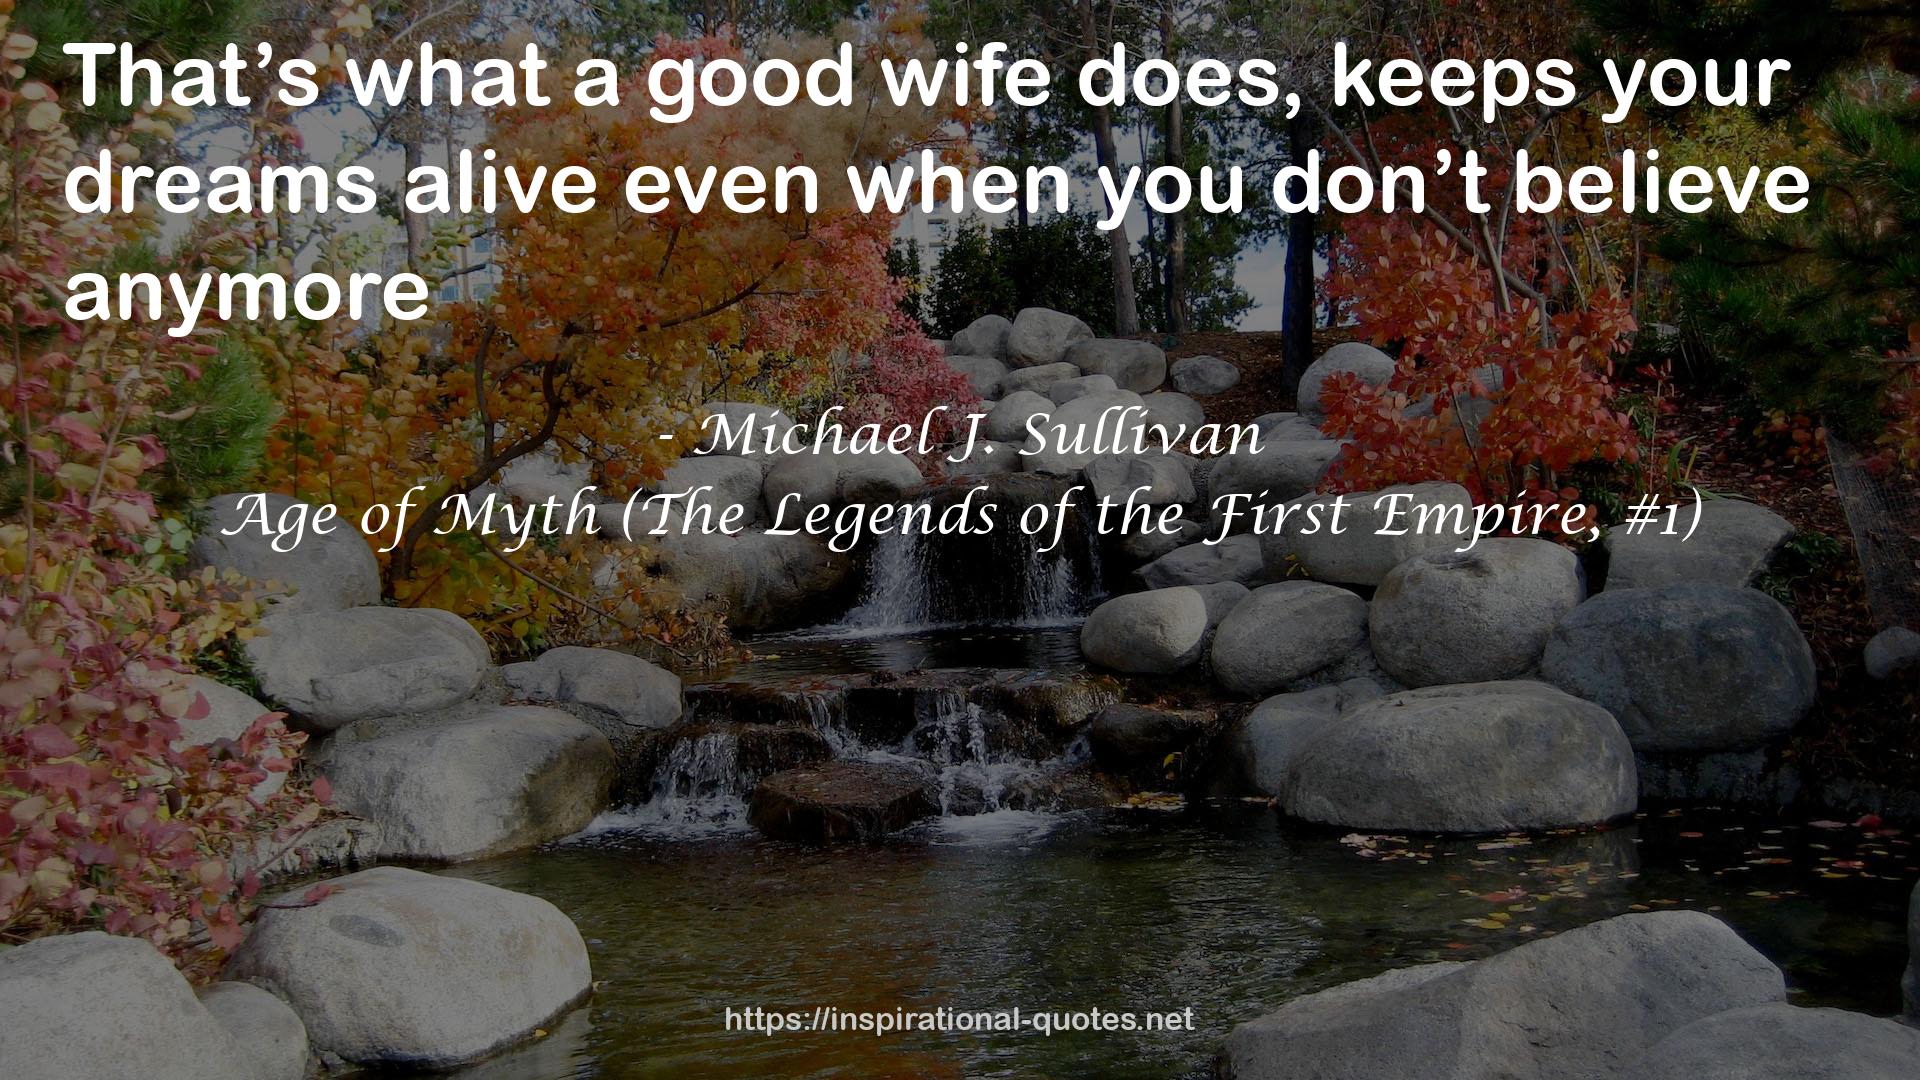 Age of Myth (The Legends of the First Empire, #1) QUOTES